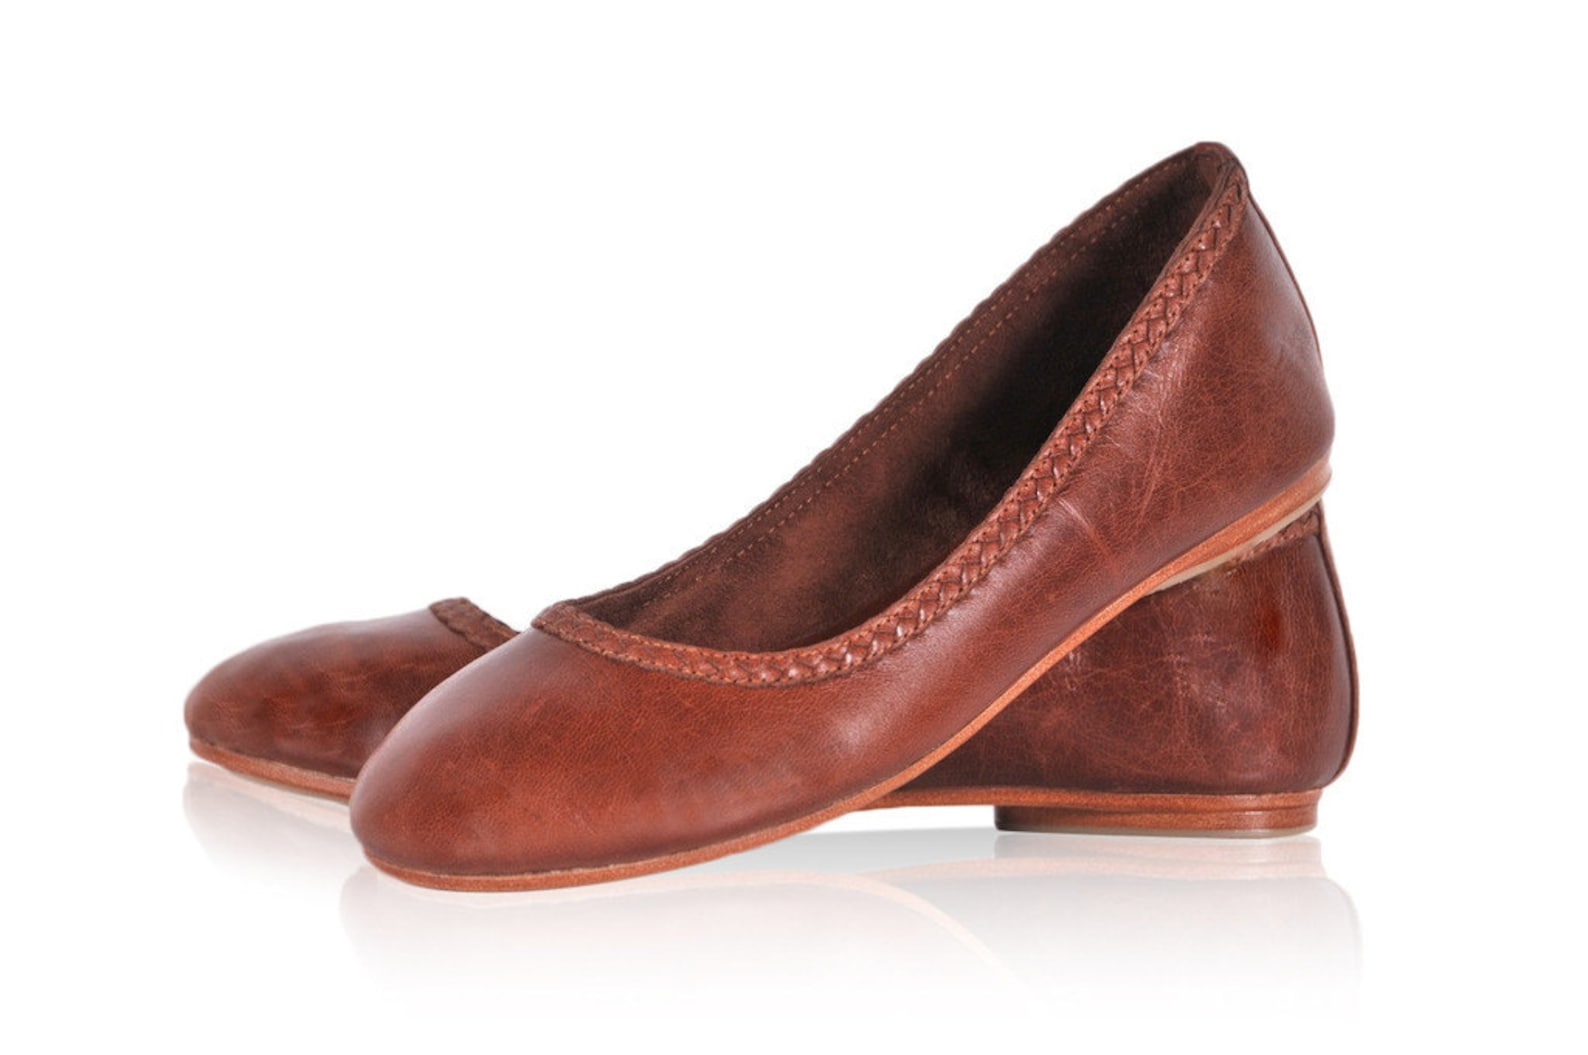 aisÉ. leather flat shoes / leather ballet flats / brown leather shoes. sizes: us 4-13, eur 35-43. available in different leather